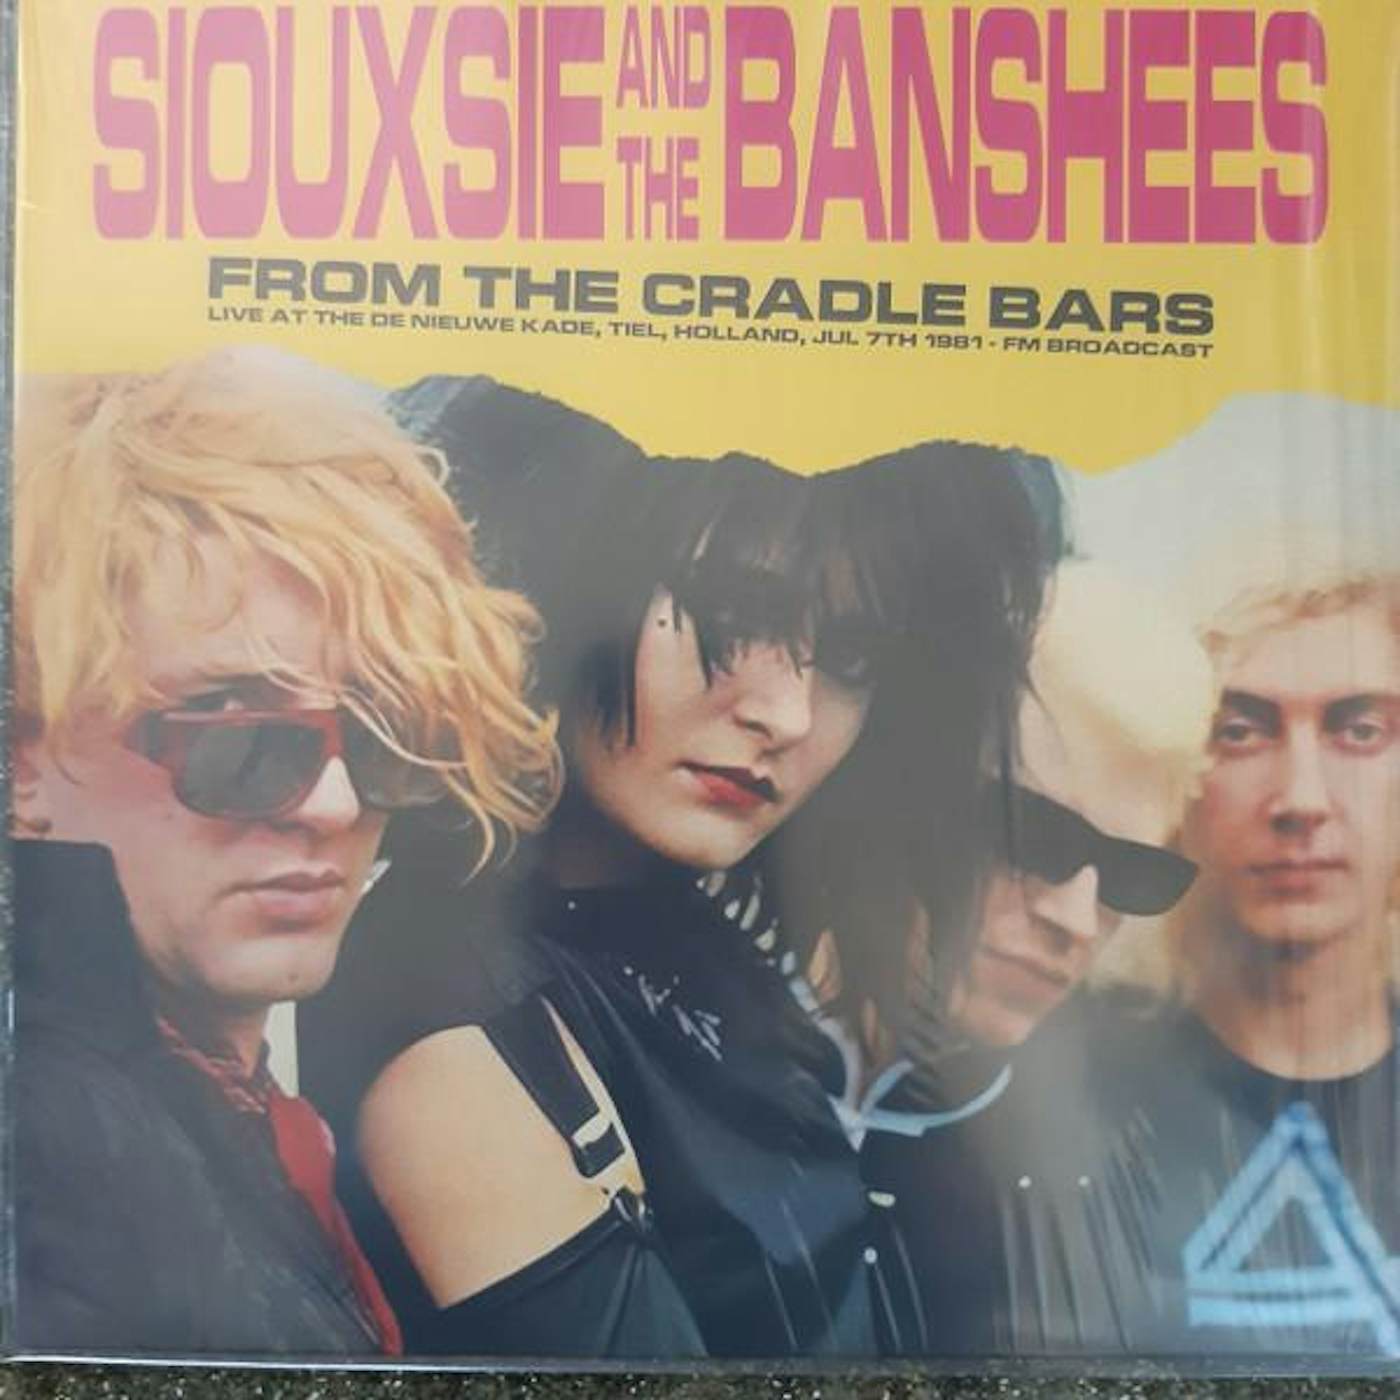 Siouxsie and the Banshees FROM THE CRADLE BARS: LIVE AT THE DE NIEUWE KADE, TIEL, HOLLAND, JUL 7TH 1981 - FM BROADCAST Vinyl Record